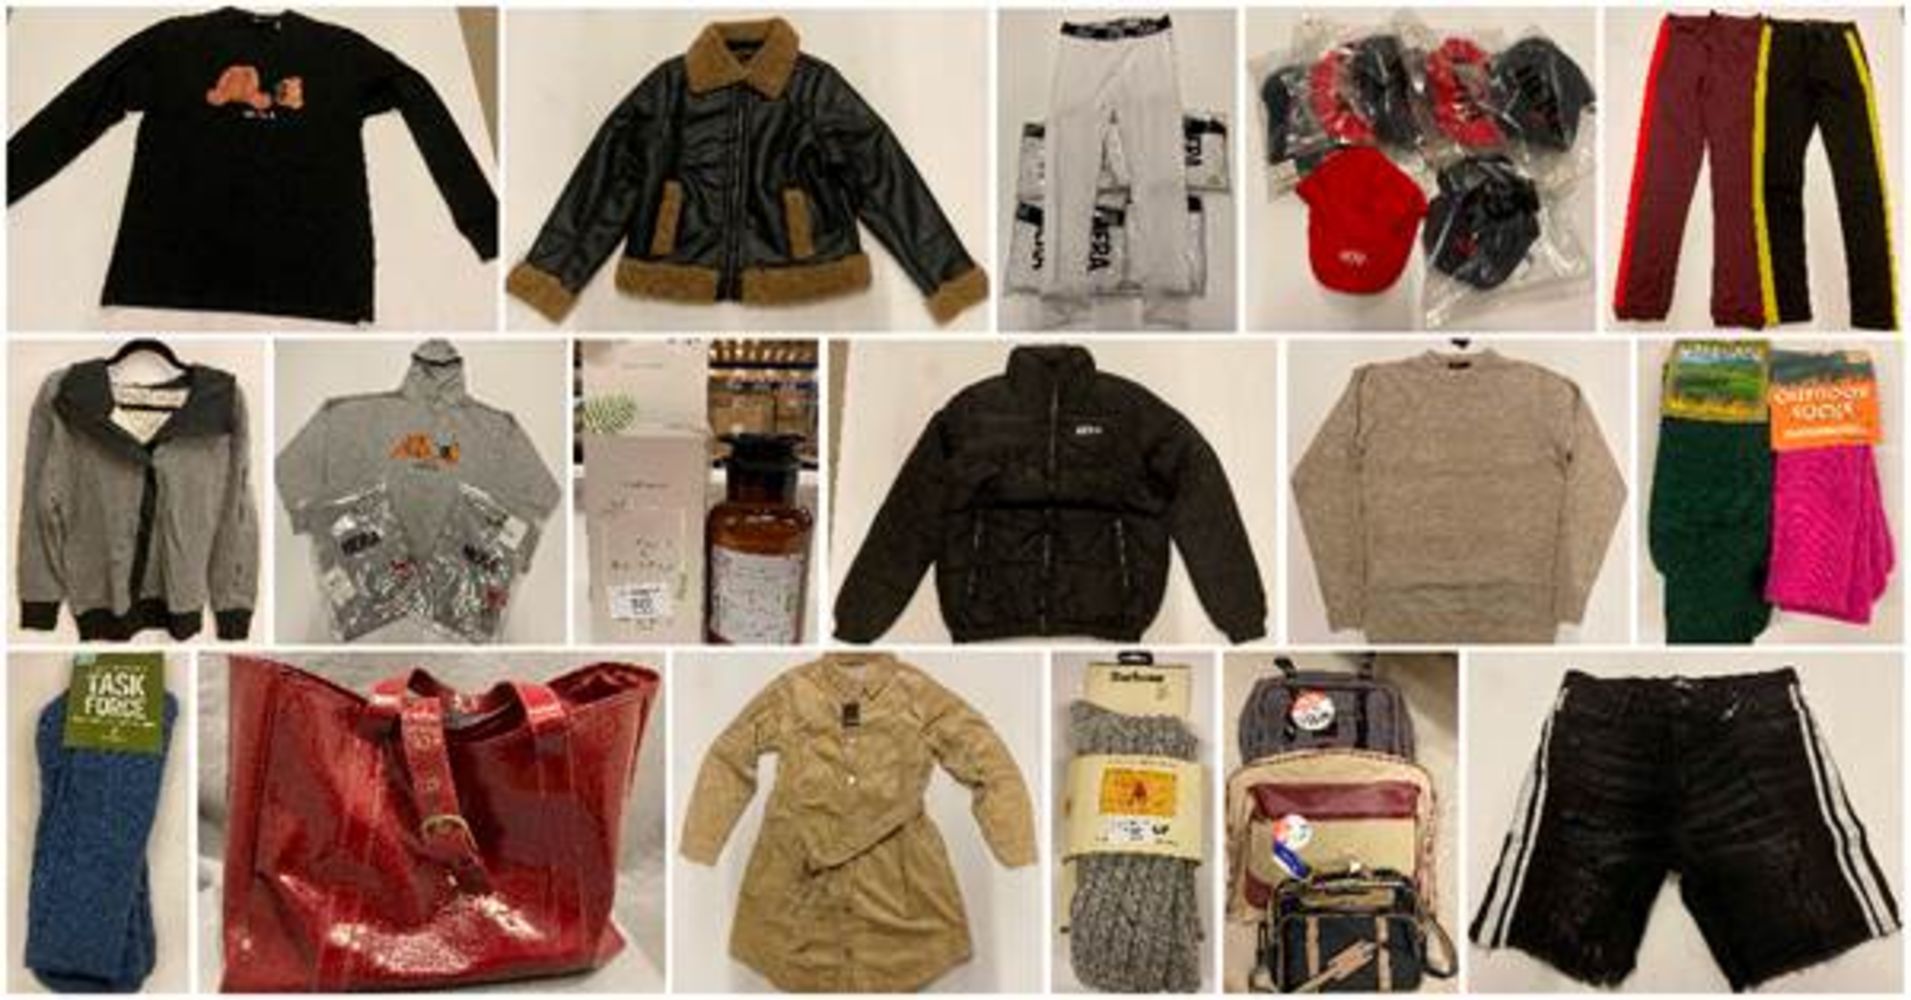 Large Quantity of Trekking/Outdoor Socks, Clothing (New & Pre-owned), Ex-Rental Camping Equipment, Crampons, etc